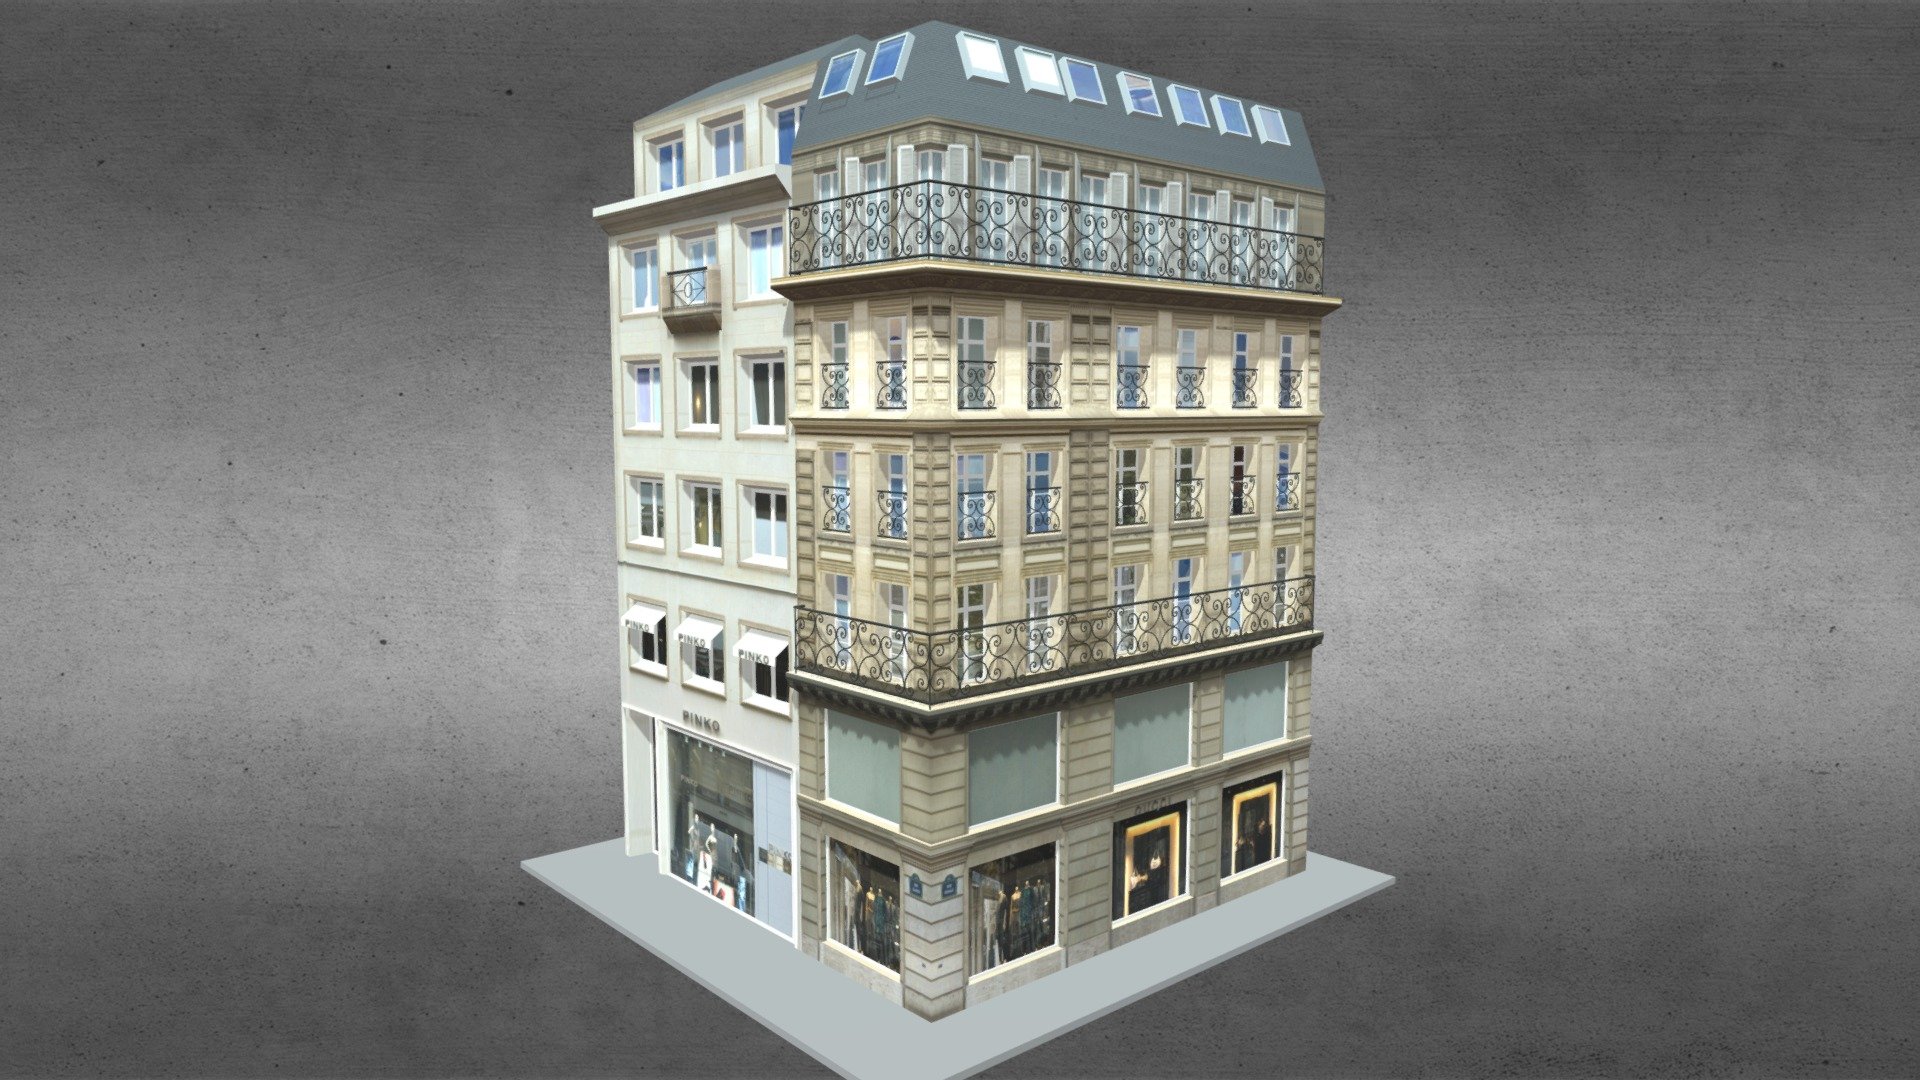 Typical Parisian Corner Building 03
Originally created with 3ds Max 2015 and rendered in V-Ray 3.0. Including Cinema 4D R13 Version

Total Poly Counts:
Poly Count = 43301
Vertex Count = 45442 - Typical Parisian Corner Building 03 - 3D model by nuralam018 3d model